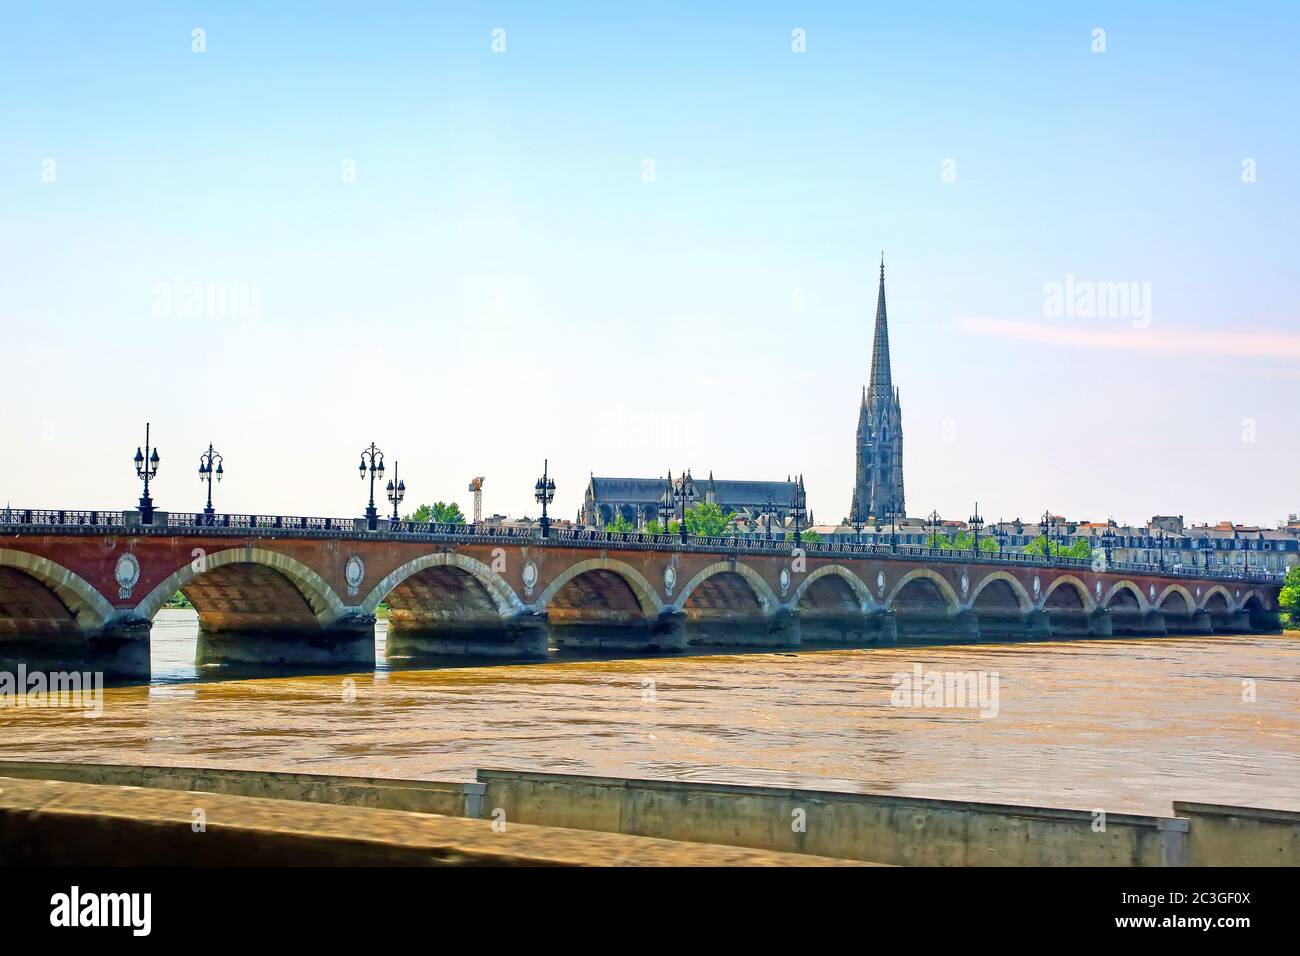 View of the Pont de pierre, or Stone Bridge in English, is a bridge in Bordeaux, France. Stock Photo